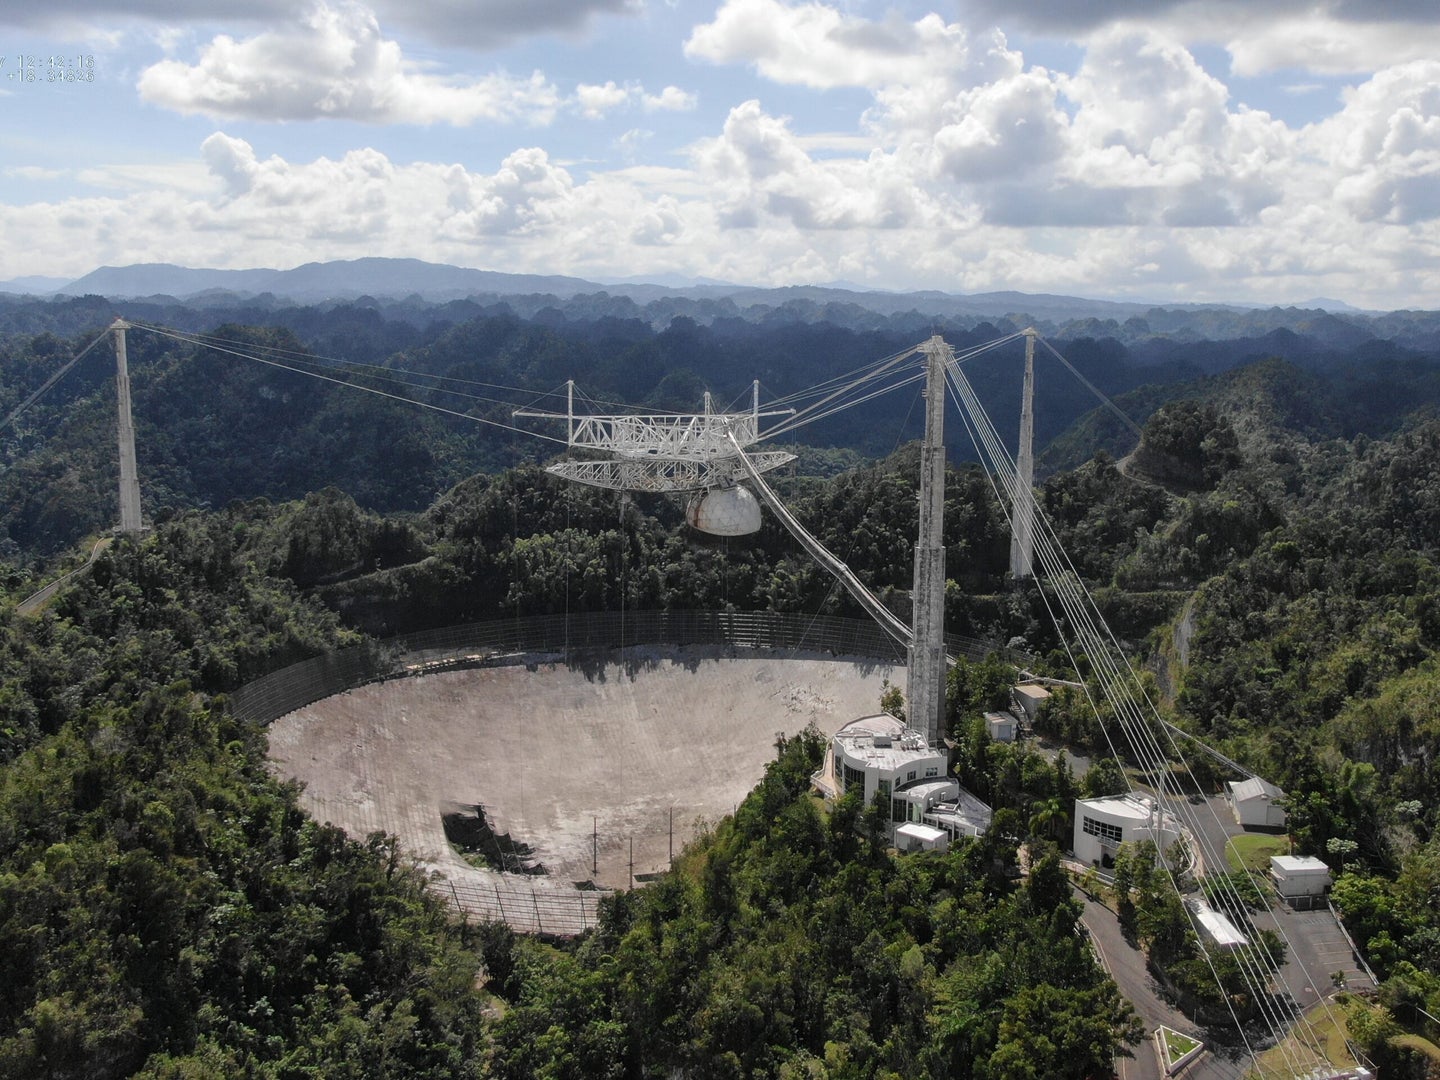 Arecibo’s disk suffered damage in November, before the suspended receiver collapsed completely in December.